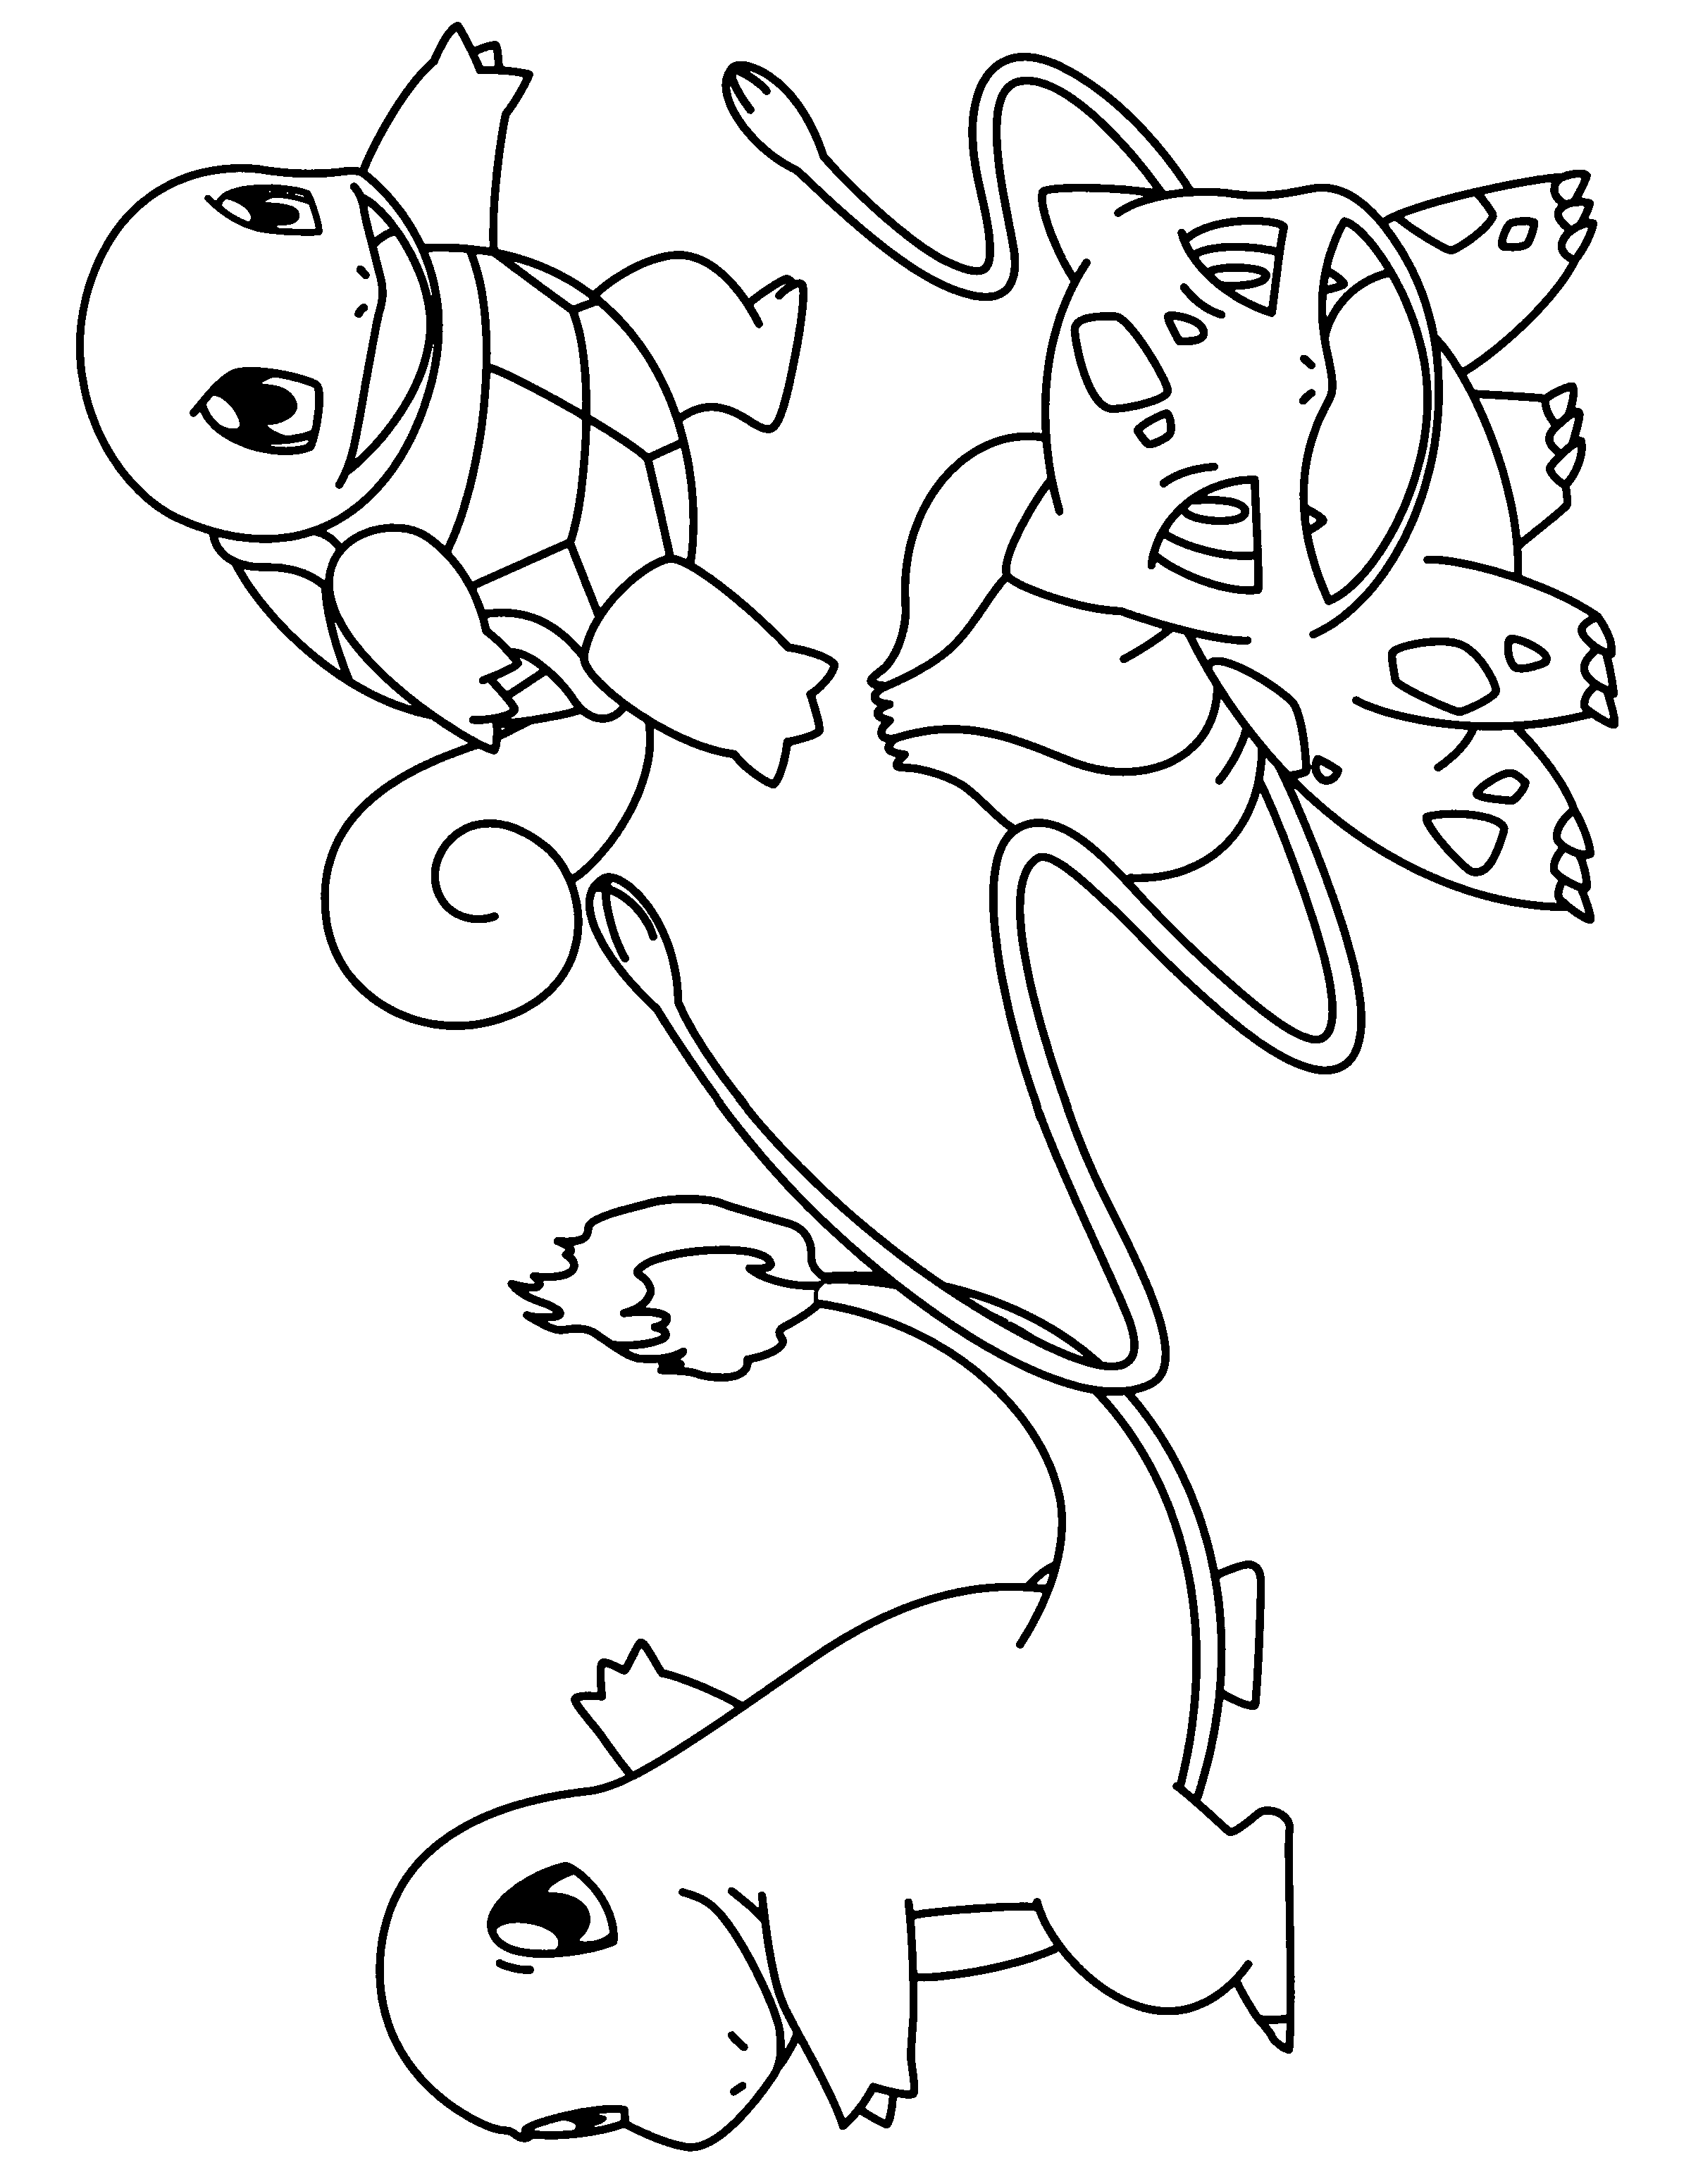 charmander coloring page sheriff charmander by awiede02 on deviantart page coloring charmander 